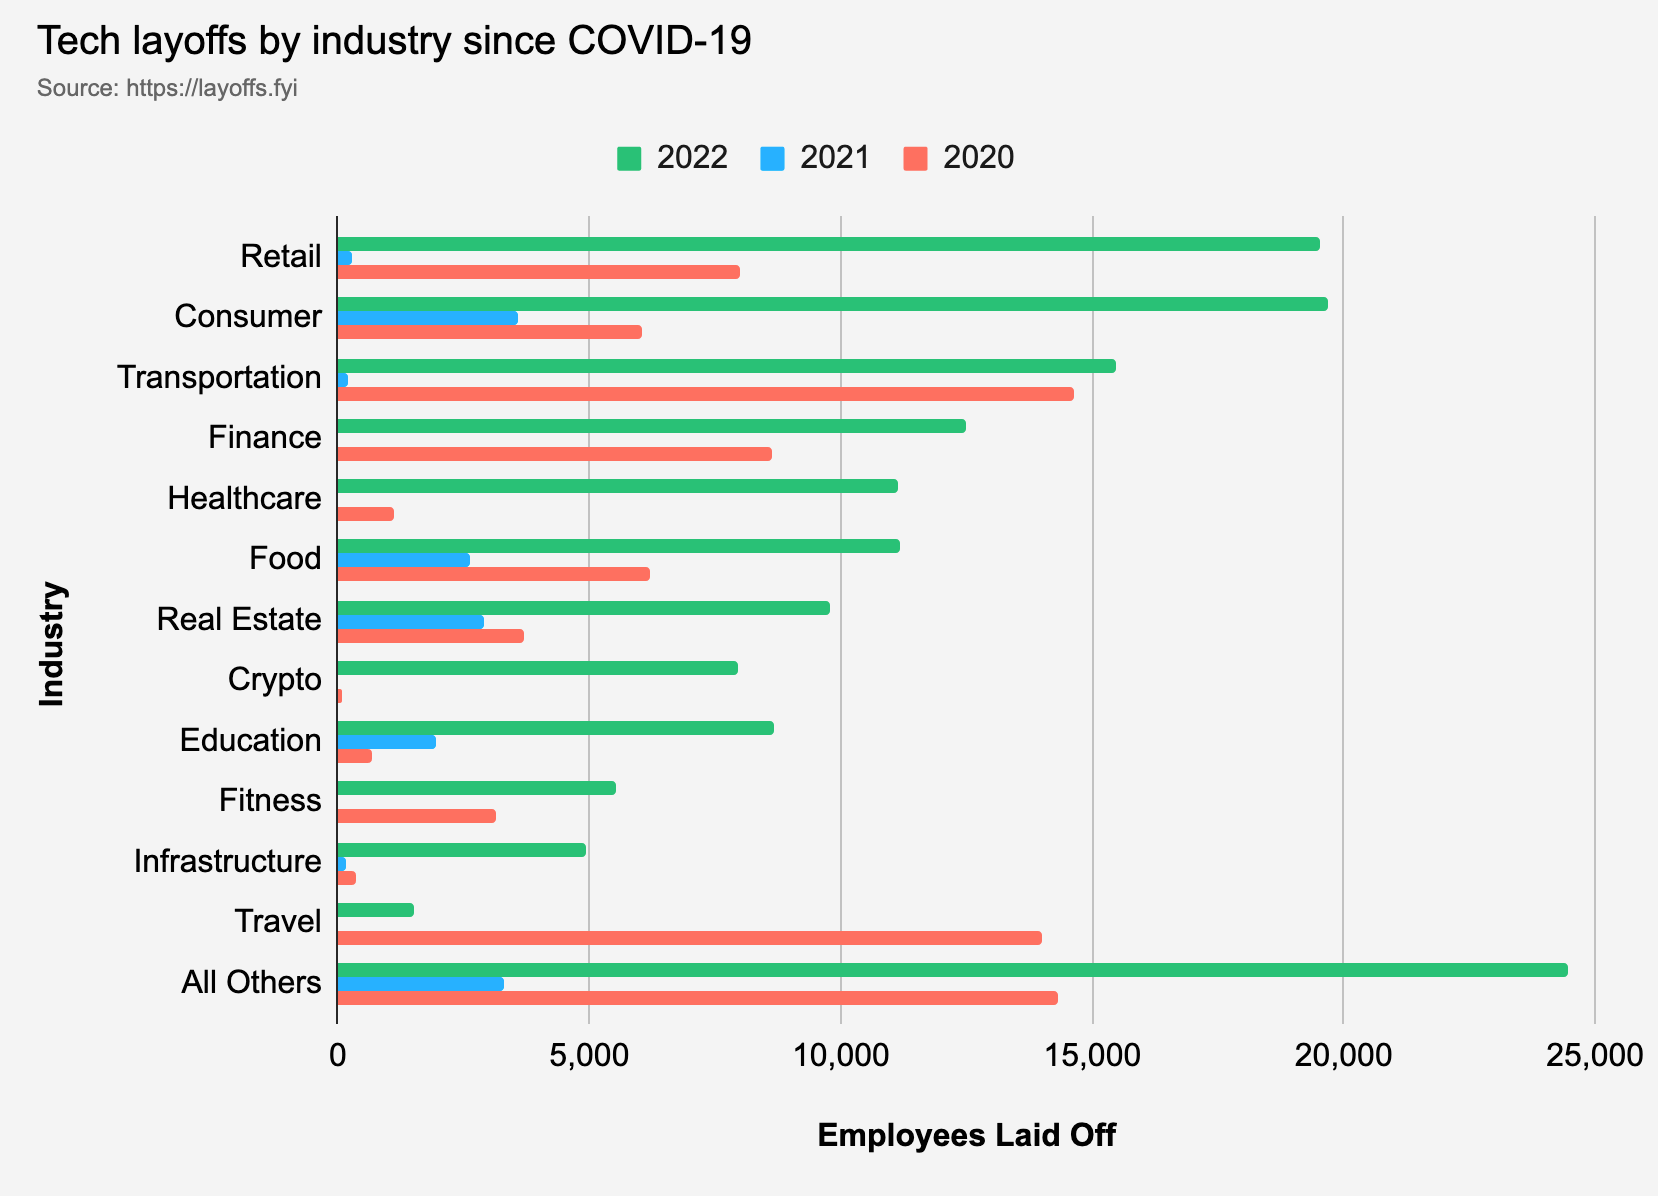 Graph shows tech layoffs by industry since the onset of COVID-19 (source: layoffs.fyi).